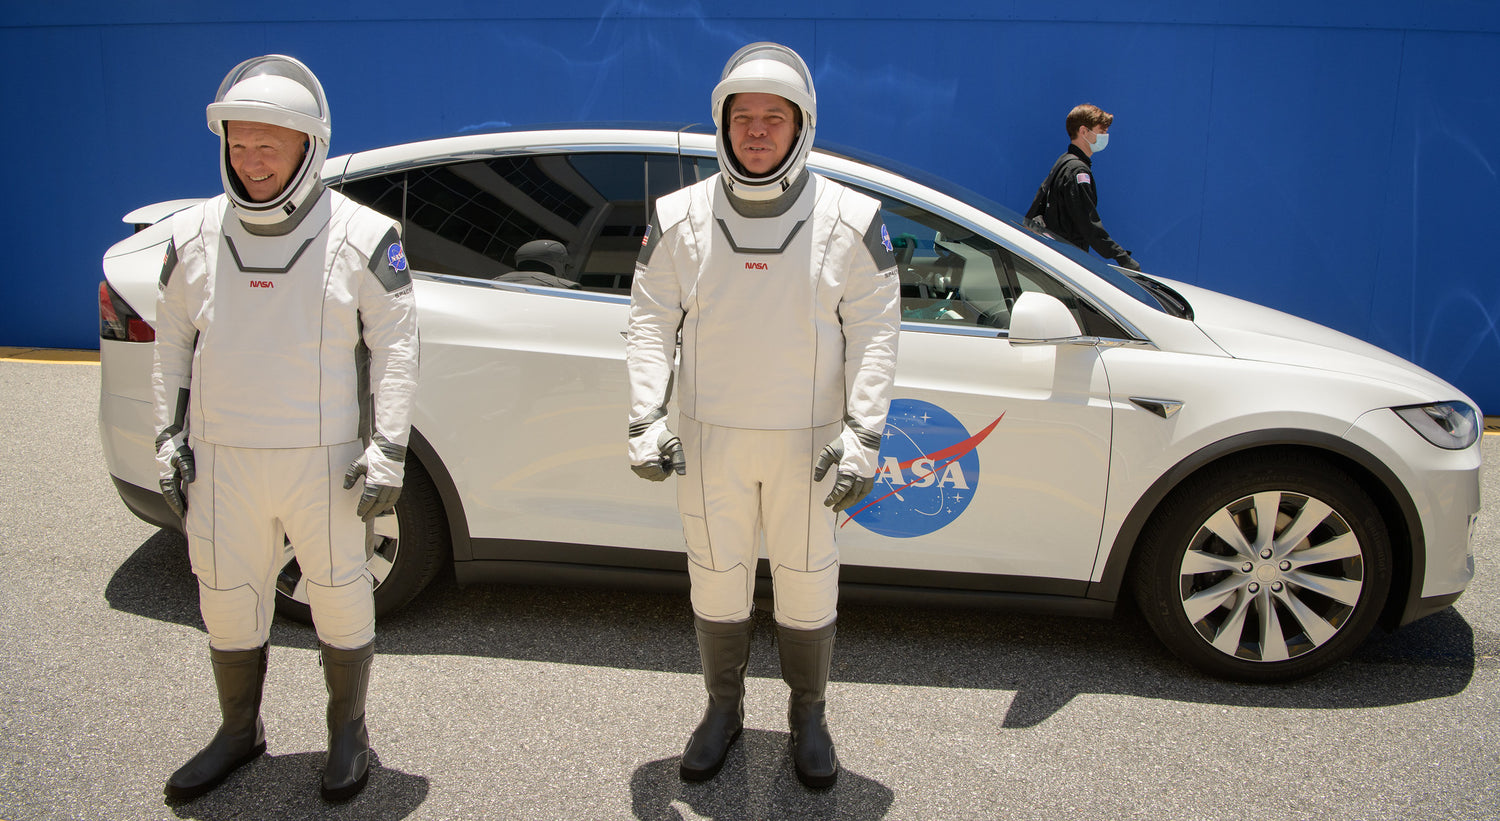 NASA Astronauts arrive in a Tesla to participate in Launch Dress Rehearsal for SpaceX mission